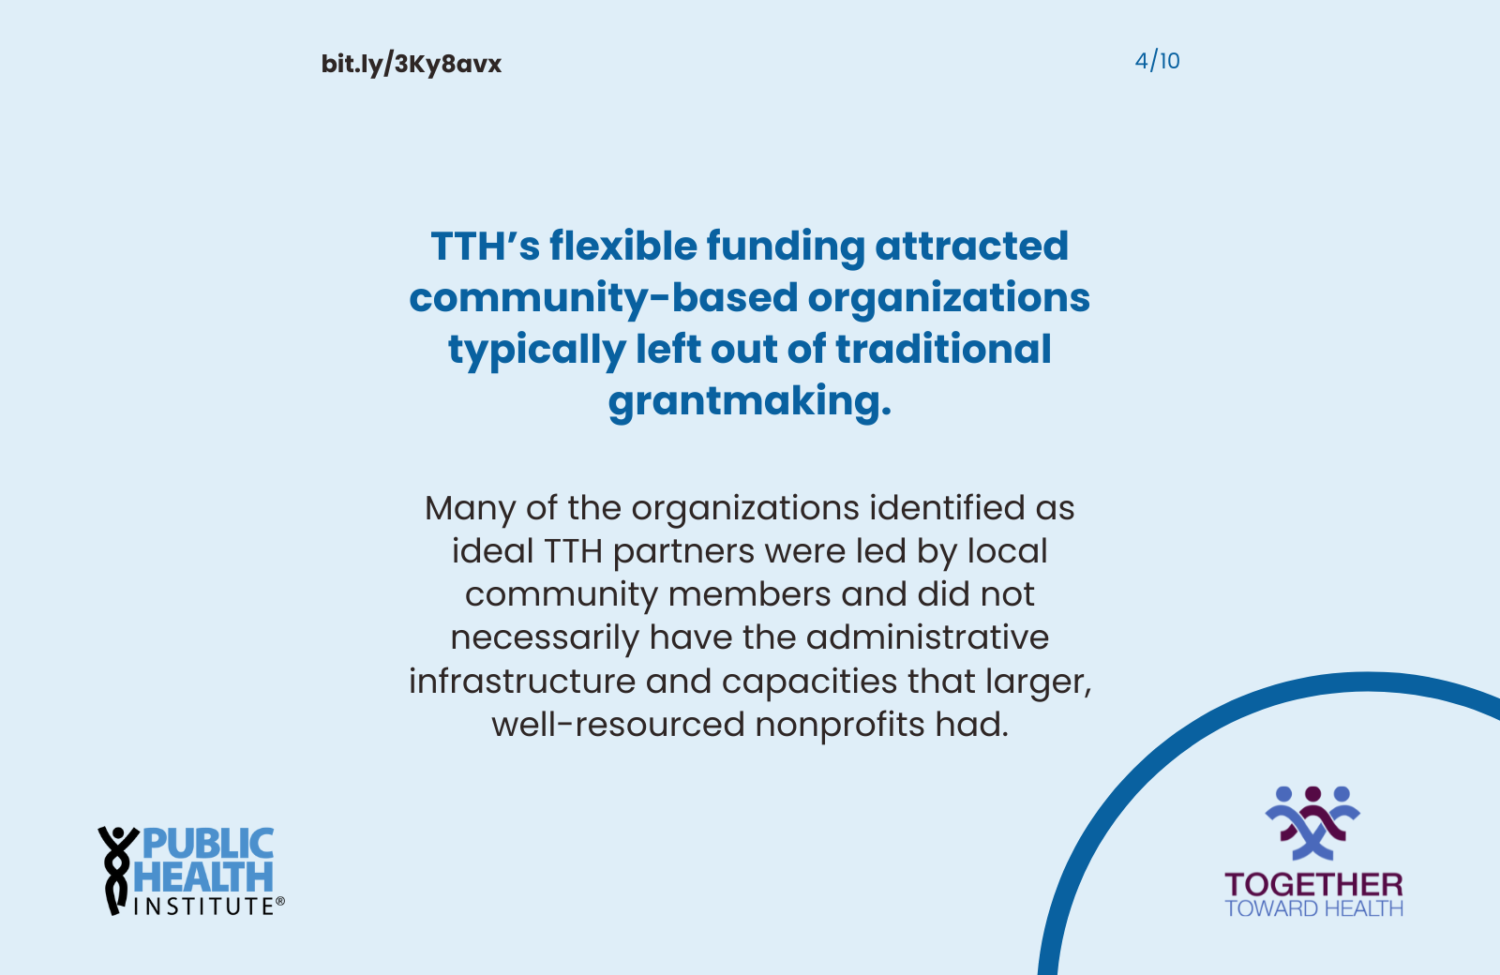 TTH’s flexible funding attracted community-based organizations typically left out of traditional grantmaking.